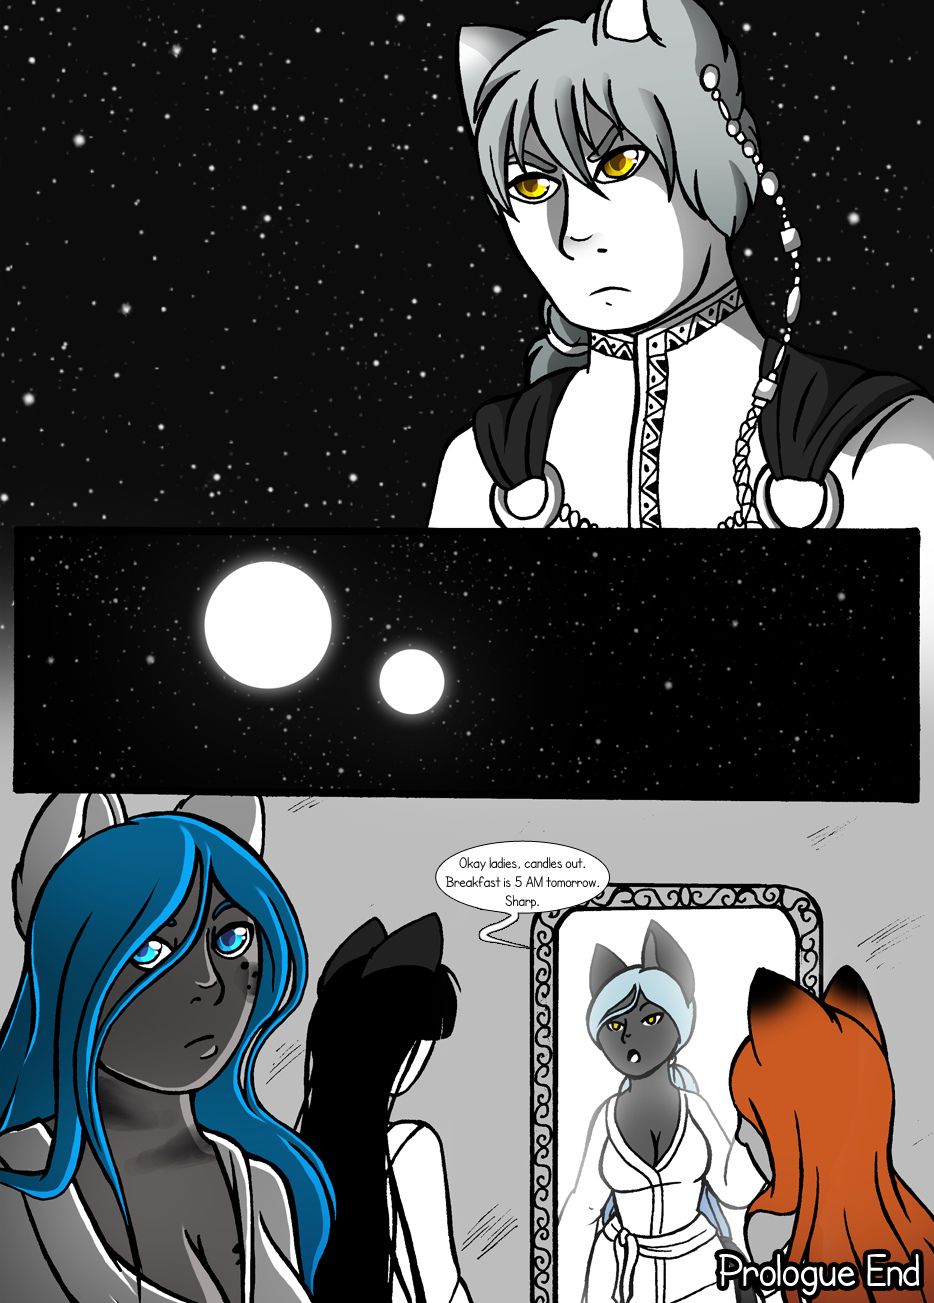 [Jeny-jen94] Between Kings and Queens [Ongoing] 15